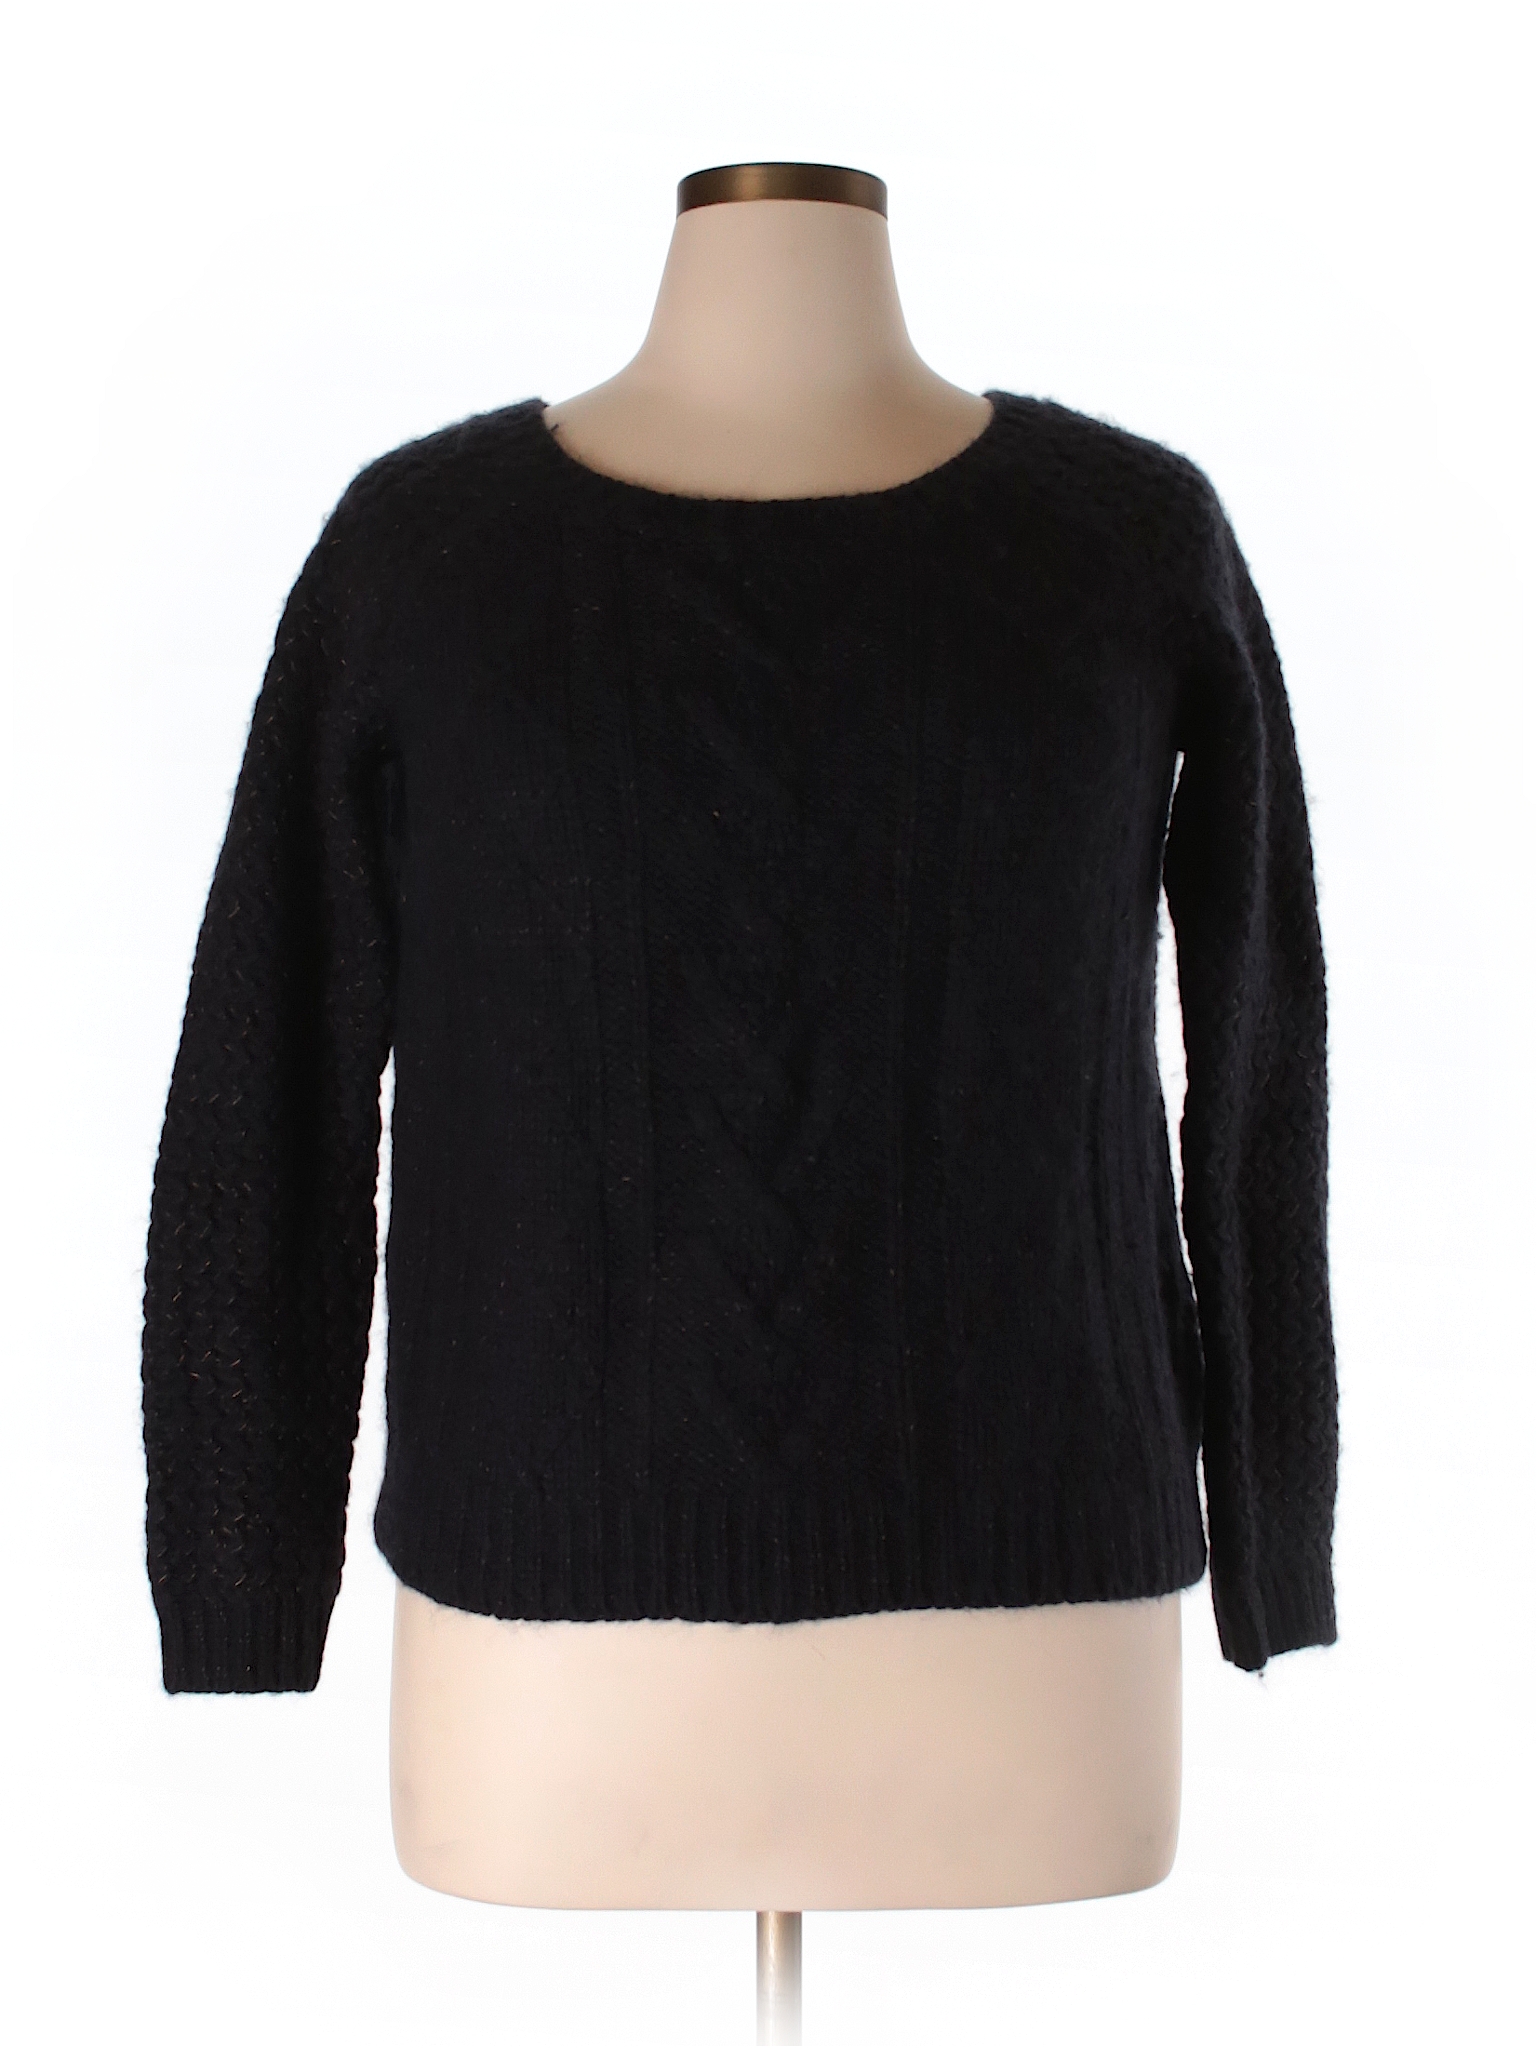 Cynthia Rowley TJX Solid Navy Blue Pullover Sweater Size 1X (Plus) - 77 ...